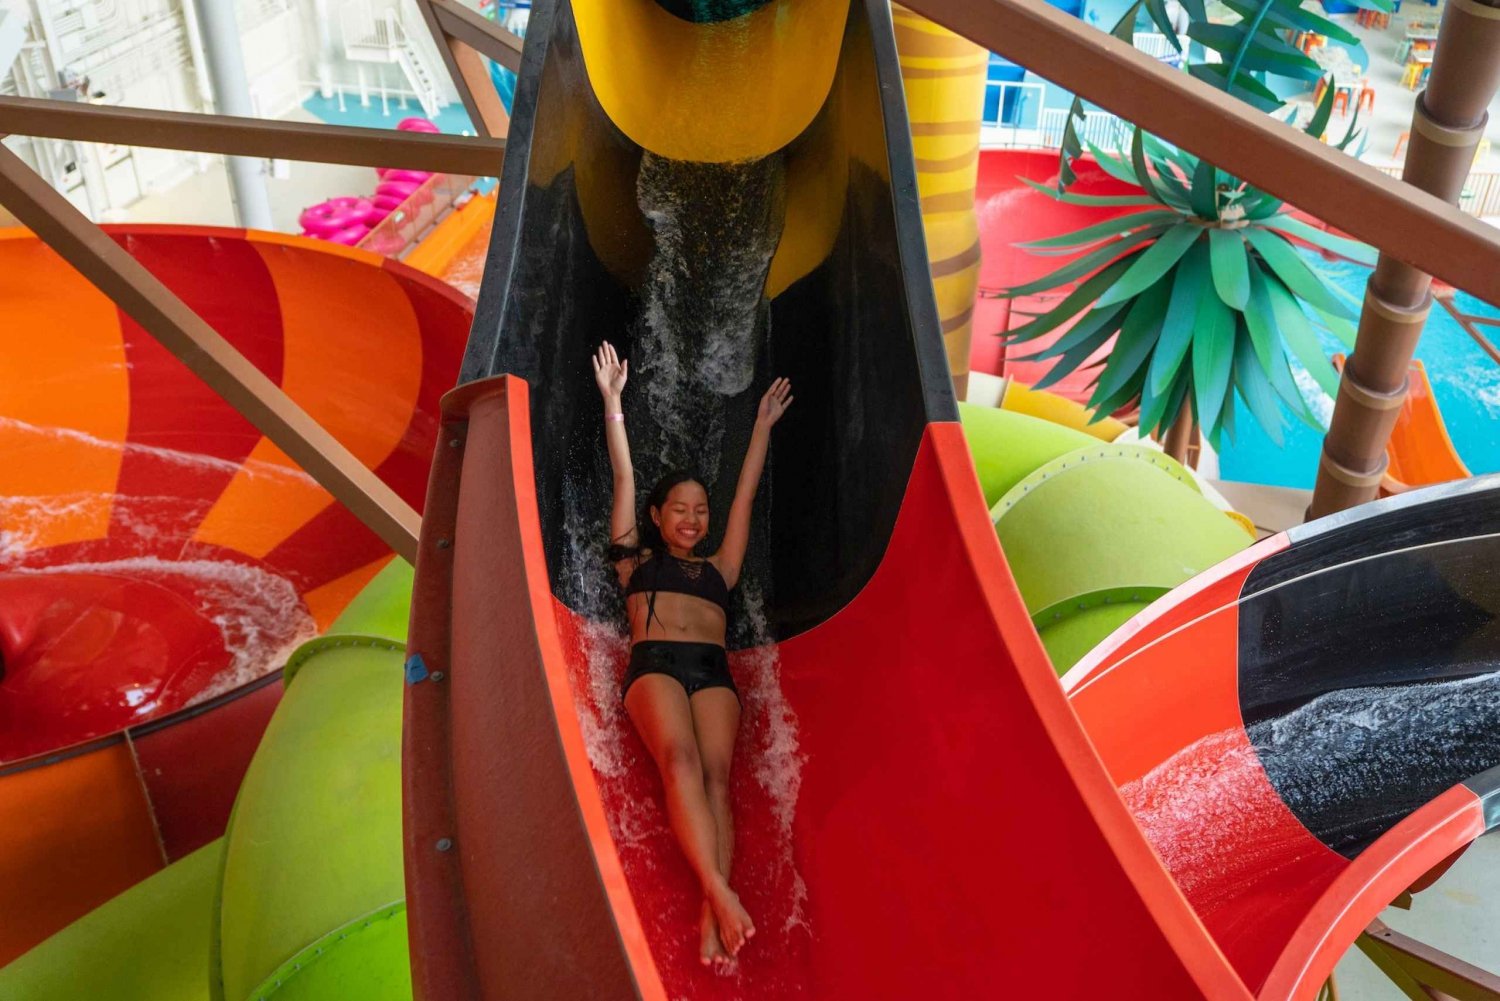 DreamWorks Water Park - America's Largest Indoor Water Park Near NYC